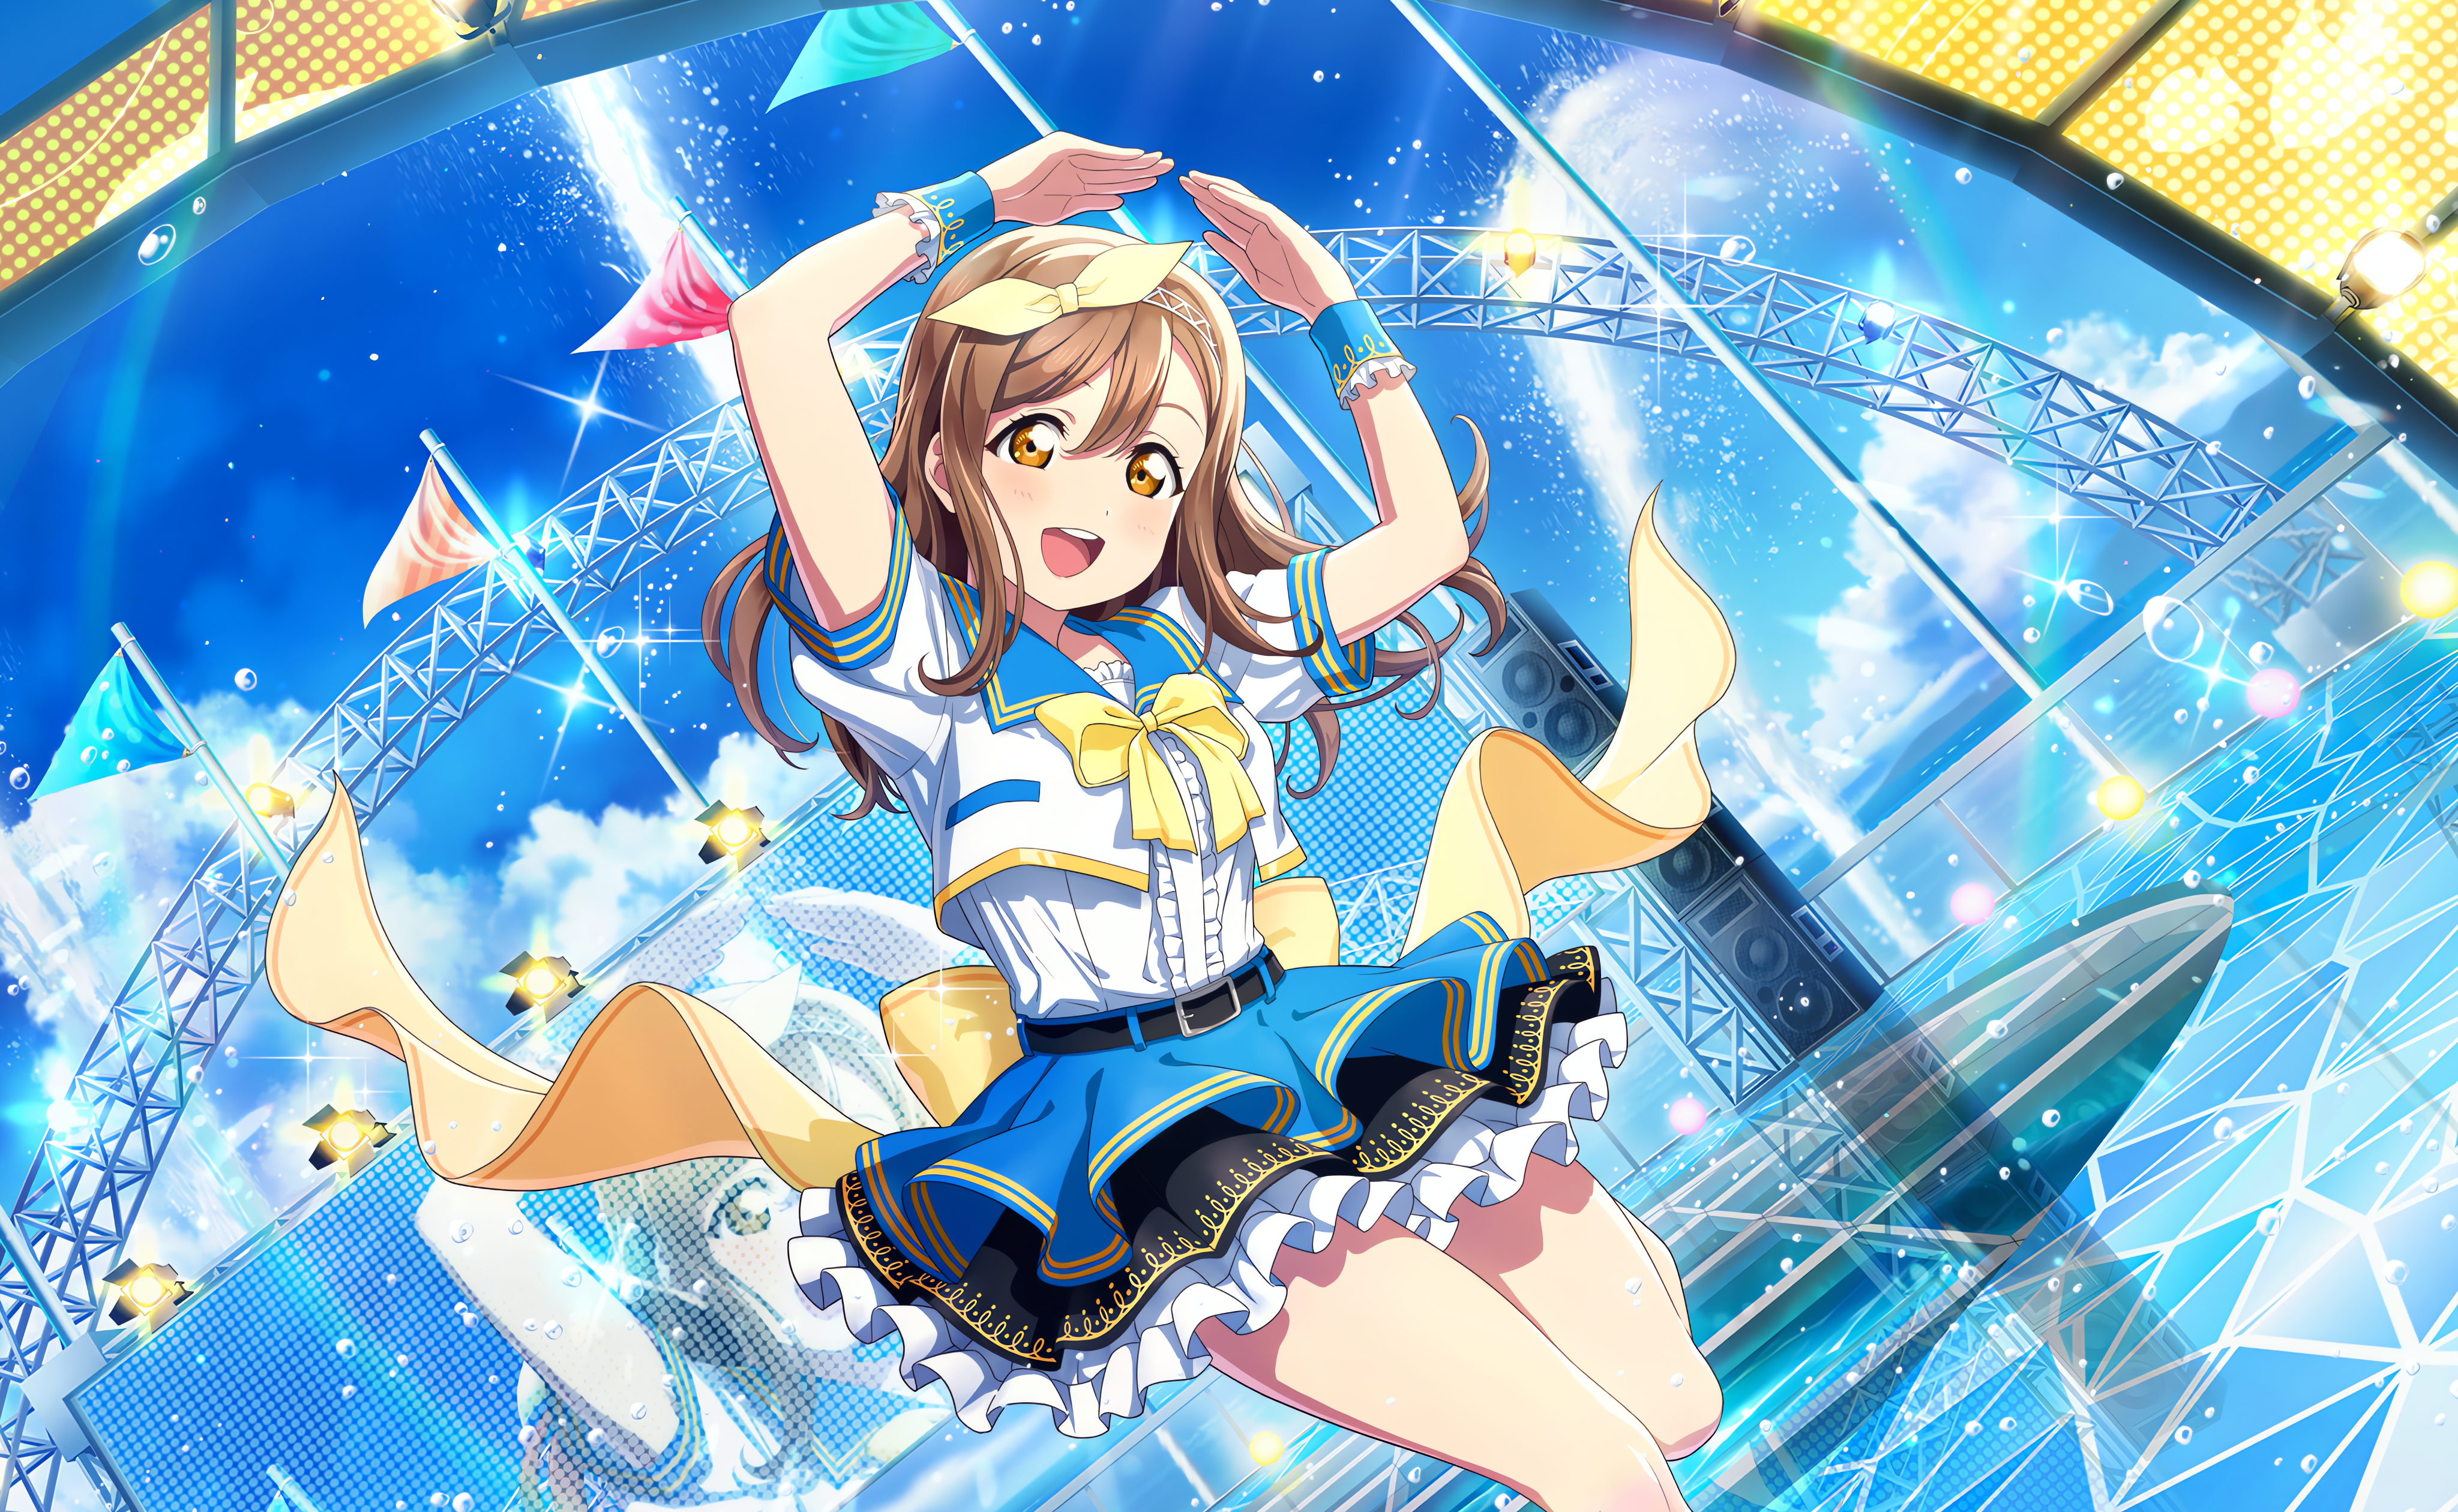 Anime 4096x2520 Kunikida Hanamaru Love Live! Love Live! Sunshine anime anime girls uniform bow tie sky clouds open mouth water water drops brunette brown eyes stages flag stage light